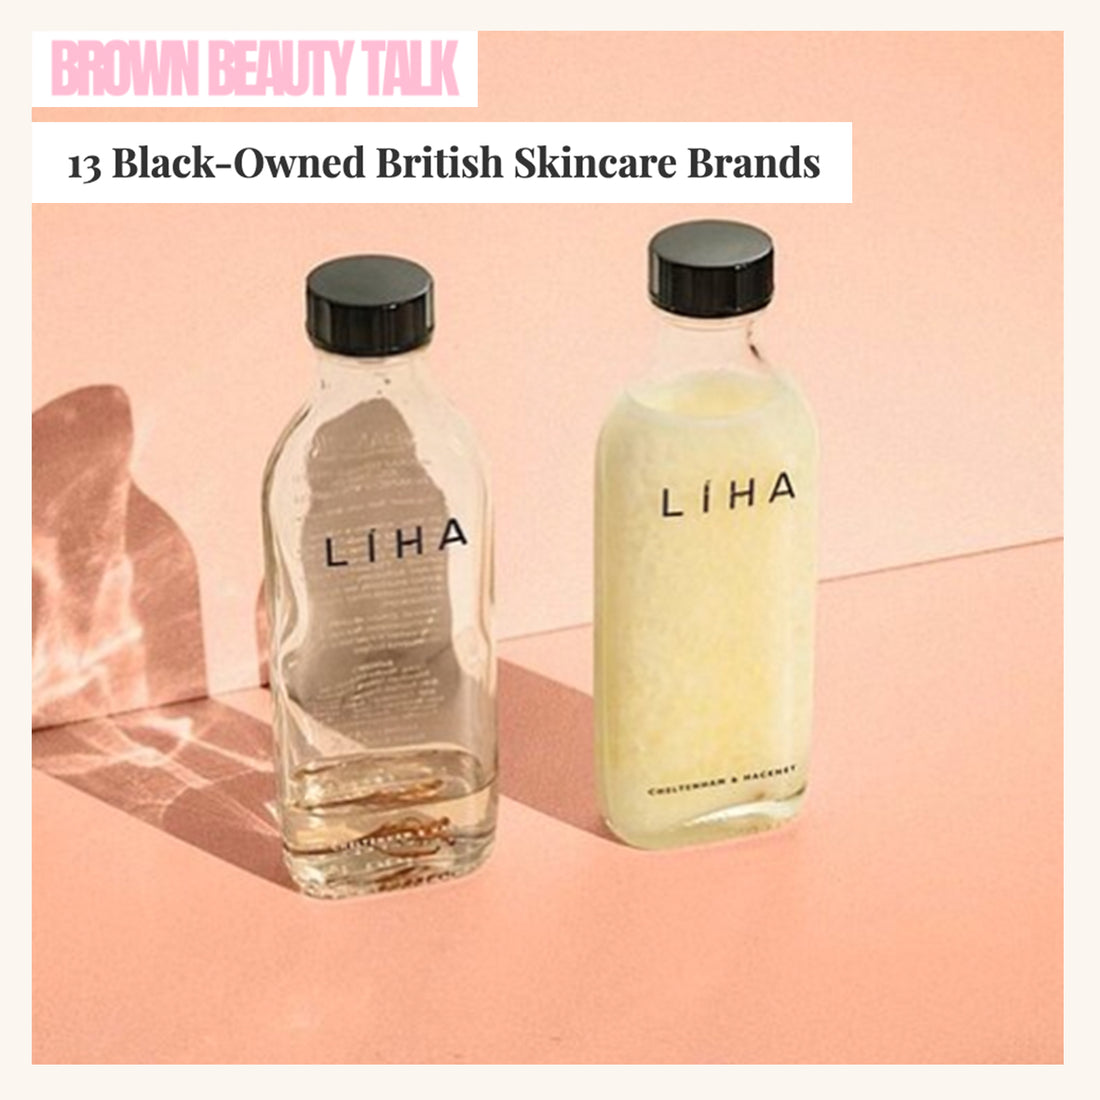 BROWN BEAUTY TALK: 13 Black-Owned British Skincare Brands